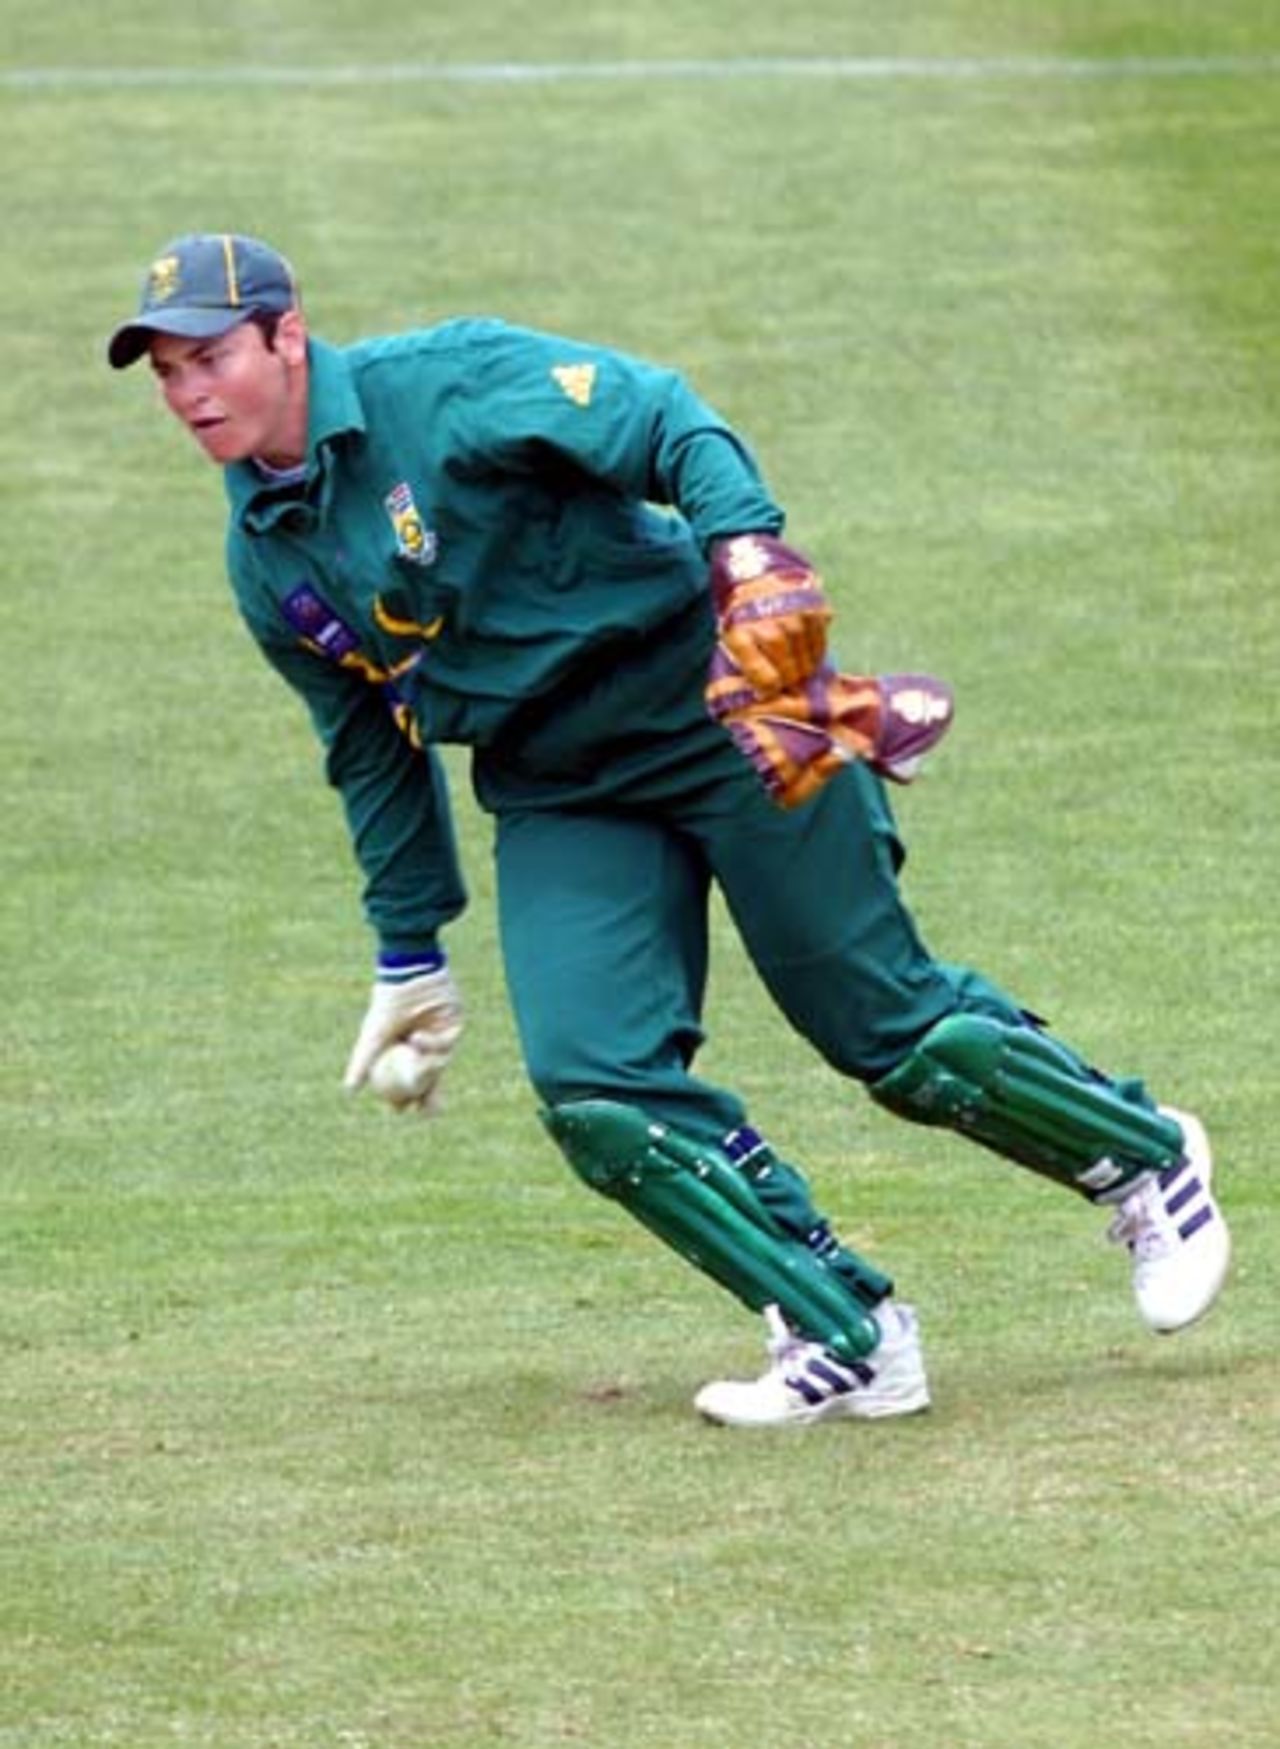 South Africa v Sri Lanka, CricInfo Women's World Cup , played at Lincoln Green, New Zealand 2000